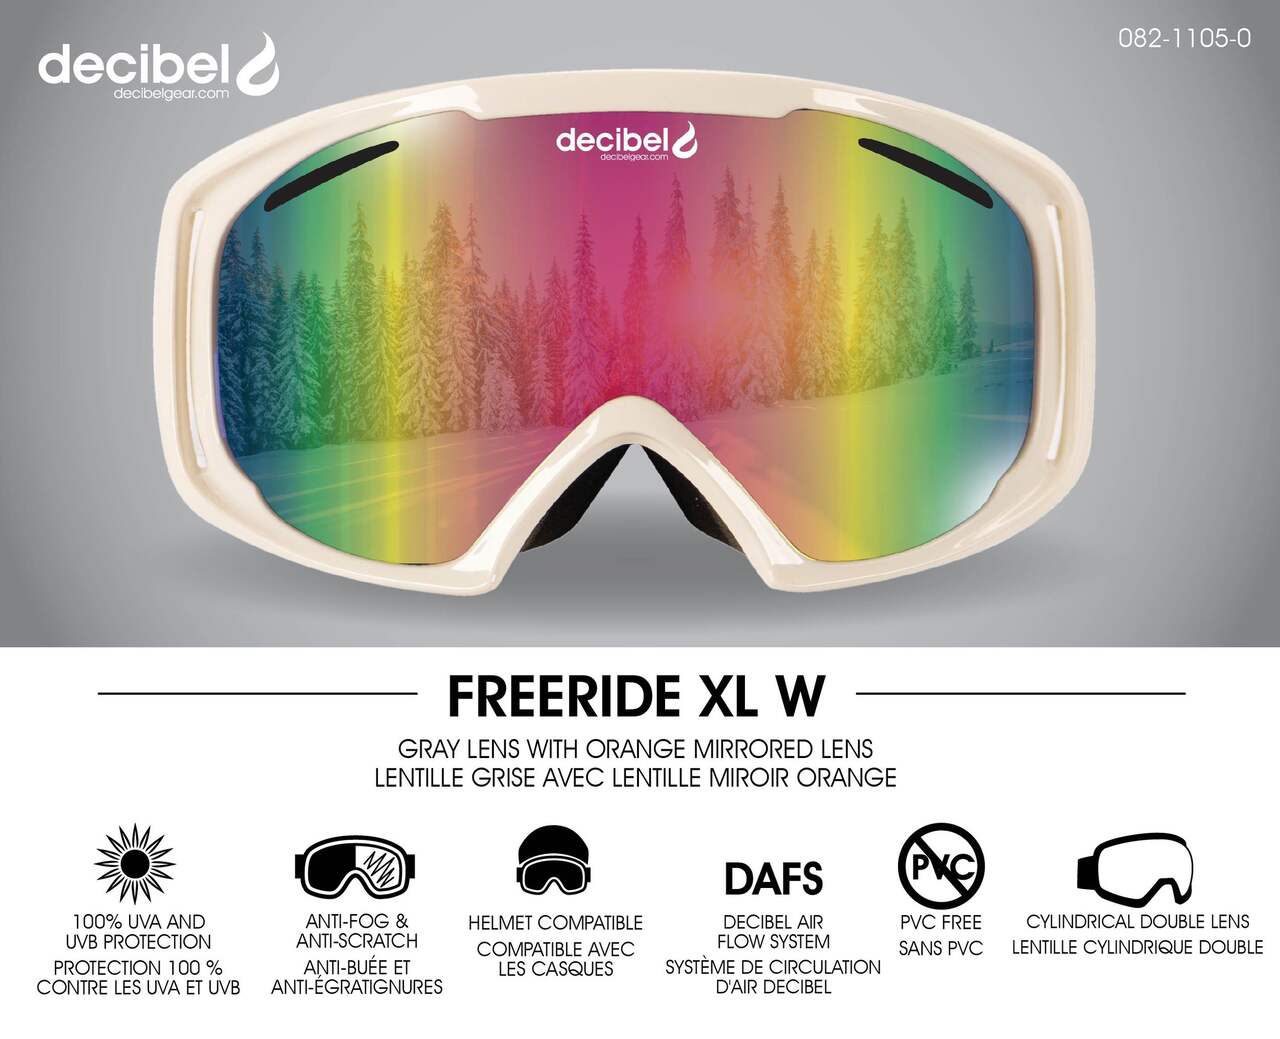 HD Snow Ski Sunglasses For Men And Women UV400 Anti Fog Winter Eyewear For  Snowboarding And Skiing Windproof And Snowproof Glasses From Db56, $21.79